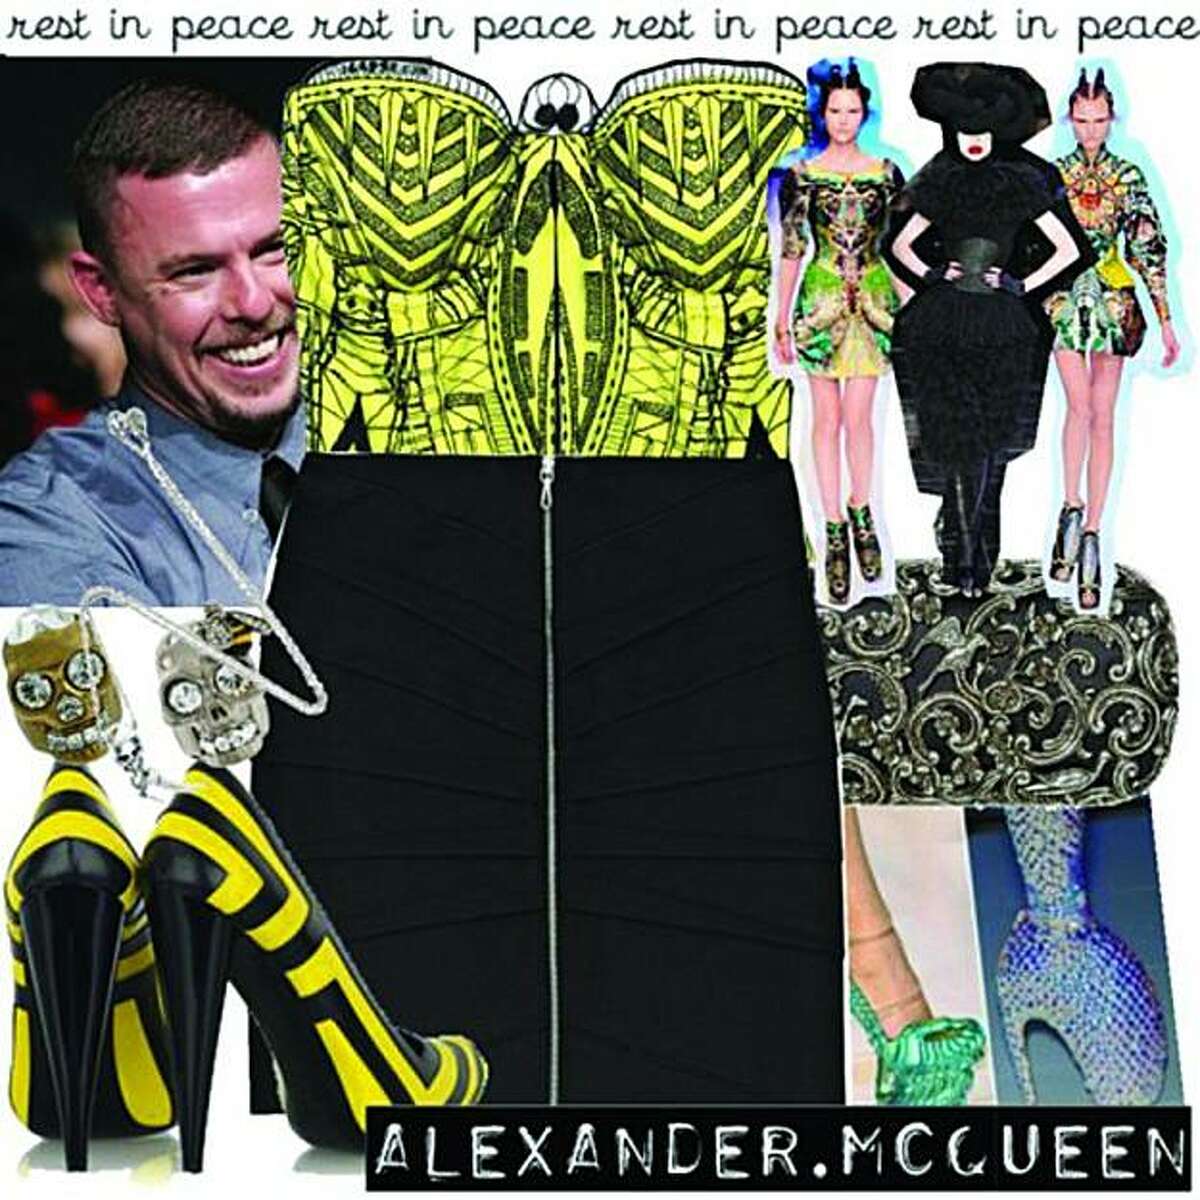 This Polyvore set, titled "RIP Alexander McQueen," was created by lalalisa.